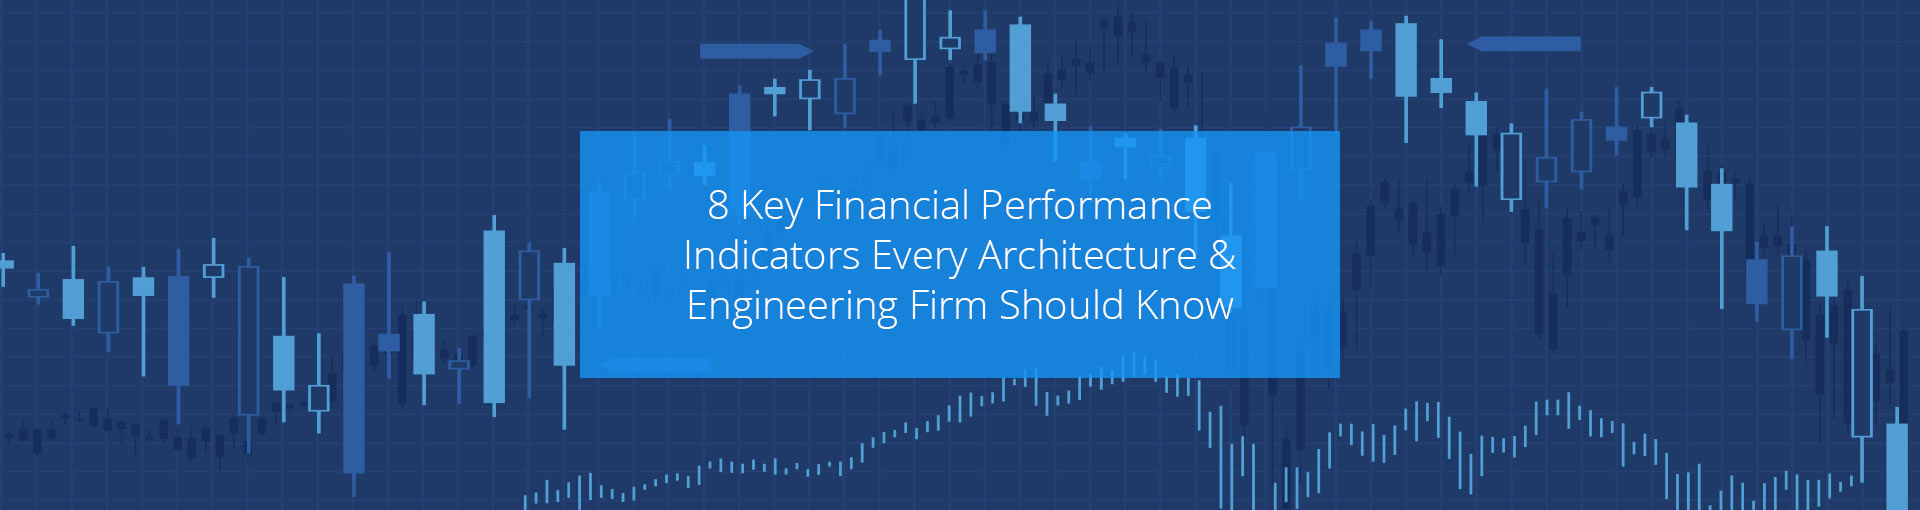 8 Key Performance Indicators Every Architecture & Engineering Firm Should Know Featured Image